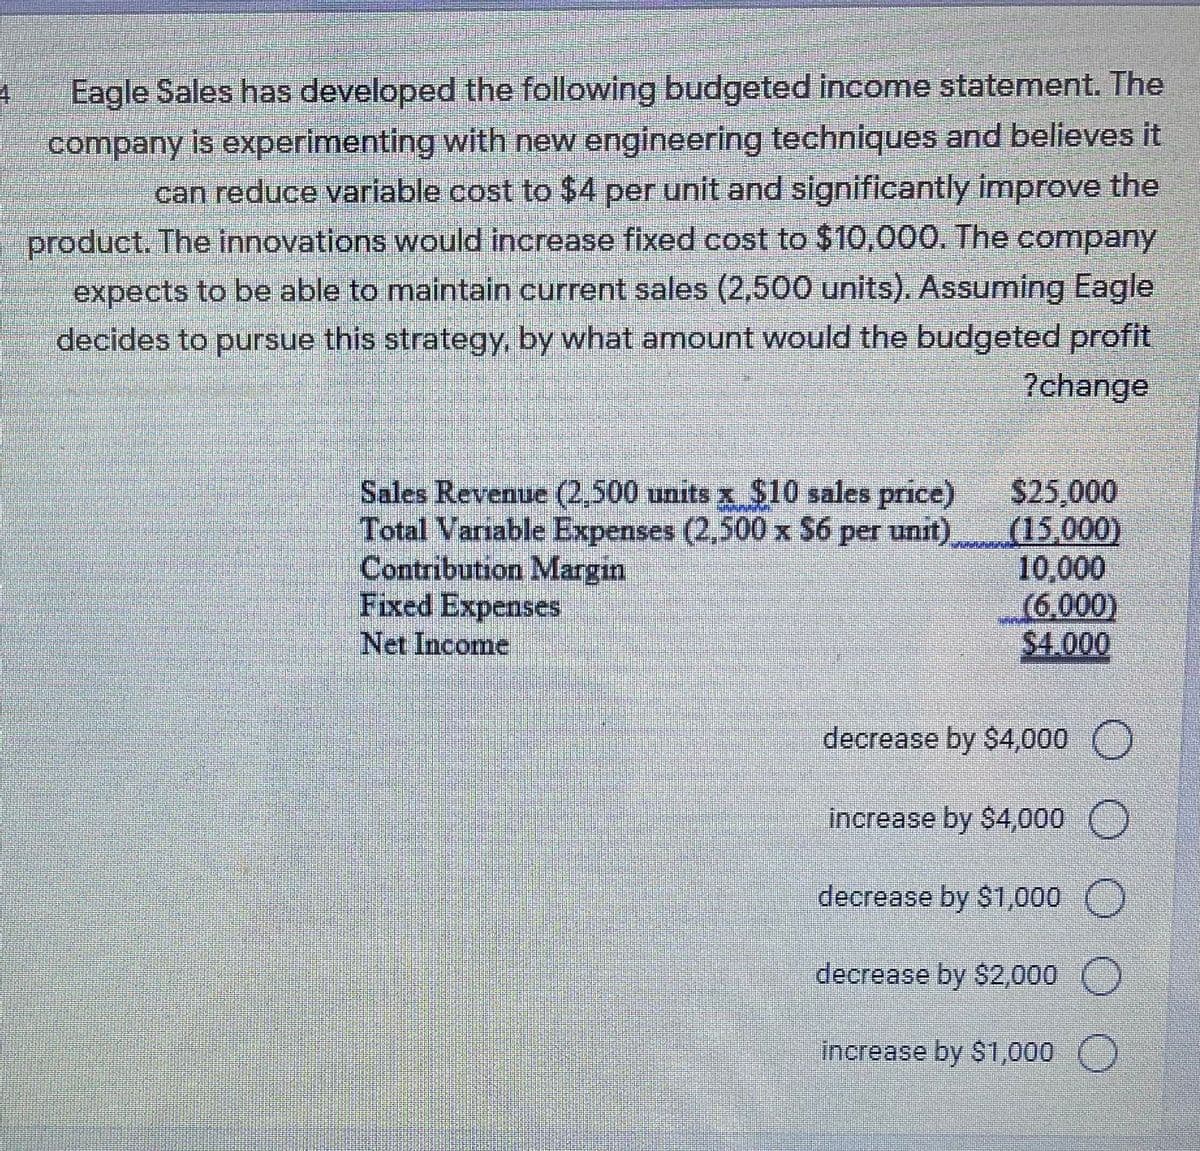 Eagle Sales has developed the following budgeted income statement. The
company is experimenting with new engineering techniques and believes it
can reduce variable cost to $4 per unit and significantly improve the
product. The innovations would increase fixed cost to $10,000. The company
expects to be able to maintain current sales (2,500 units). Assuming Eagle
decides to pursue this strategy, by what amount would the budgeted profit
?change
Sales Revenue (2.500 units x $10 sales price)
Total Variable Expenses (2,500 x S6 per unit).
Contribution Margin
Fixed Expenses
Net Income
S25,000
(15,000)
10,000
(6,000)
$4.000
decrease by $4,000 )
increase by S4,000
decrease by $1,000 O
decrease by $2,000
increase by $1,000
